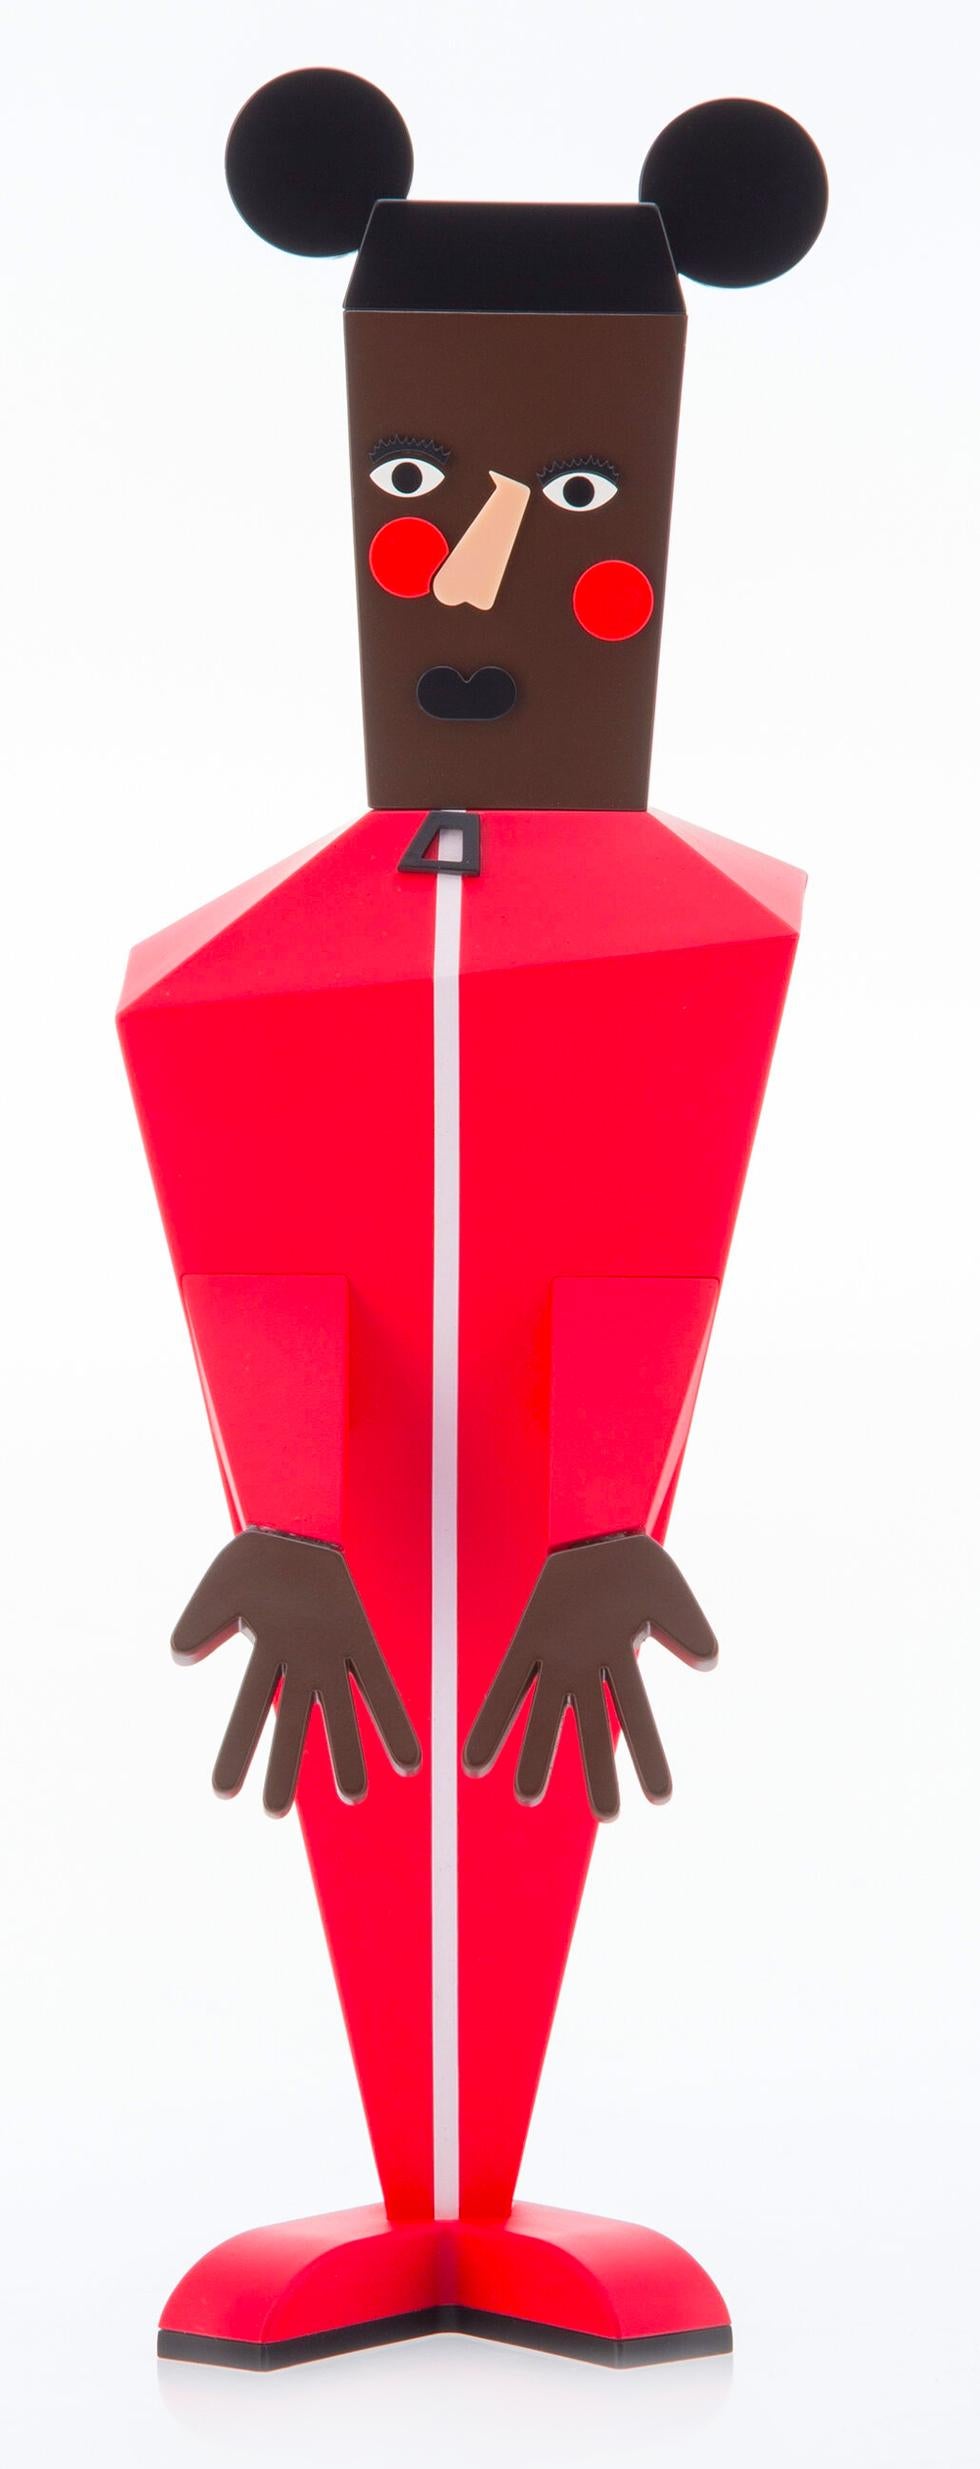 Nina Chanel Abney Baby: 
Nina Chanel’s 'Baby' figure strikingly re-imagines Mickey Mouse as a man dressed in a bright red jumpsuit, with mirroring red circles stamped on the cheeks. Constructed with sharp angles and an asymmetrical mold, the figure